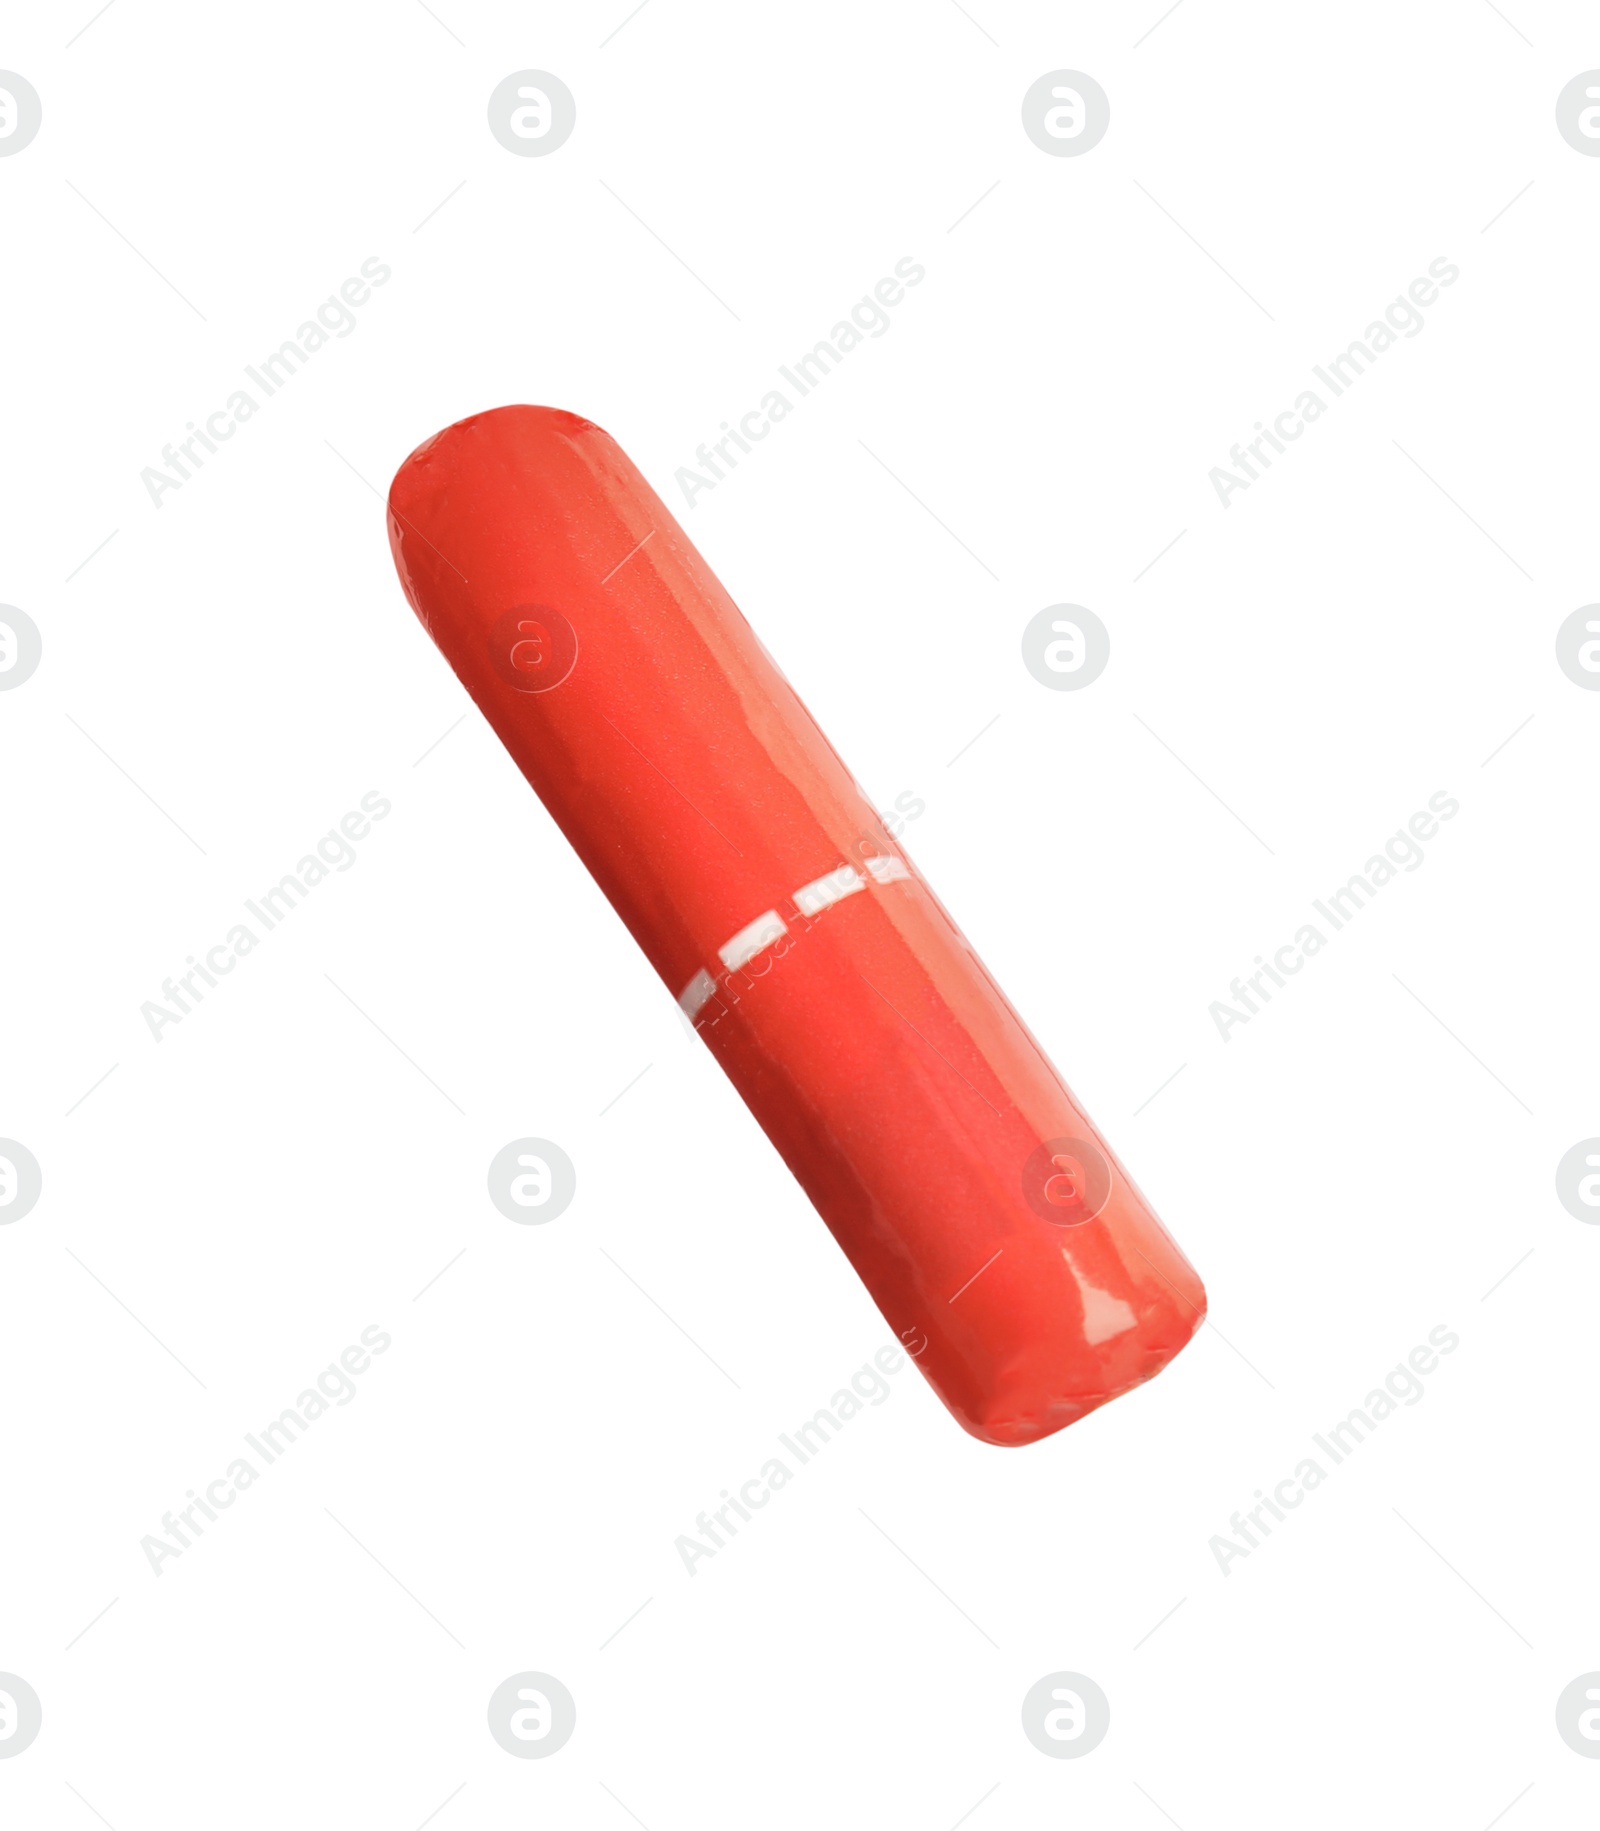 Photo of Tampon in red package isolated on white